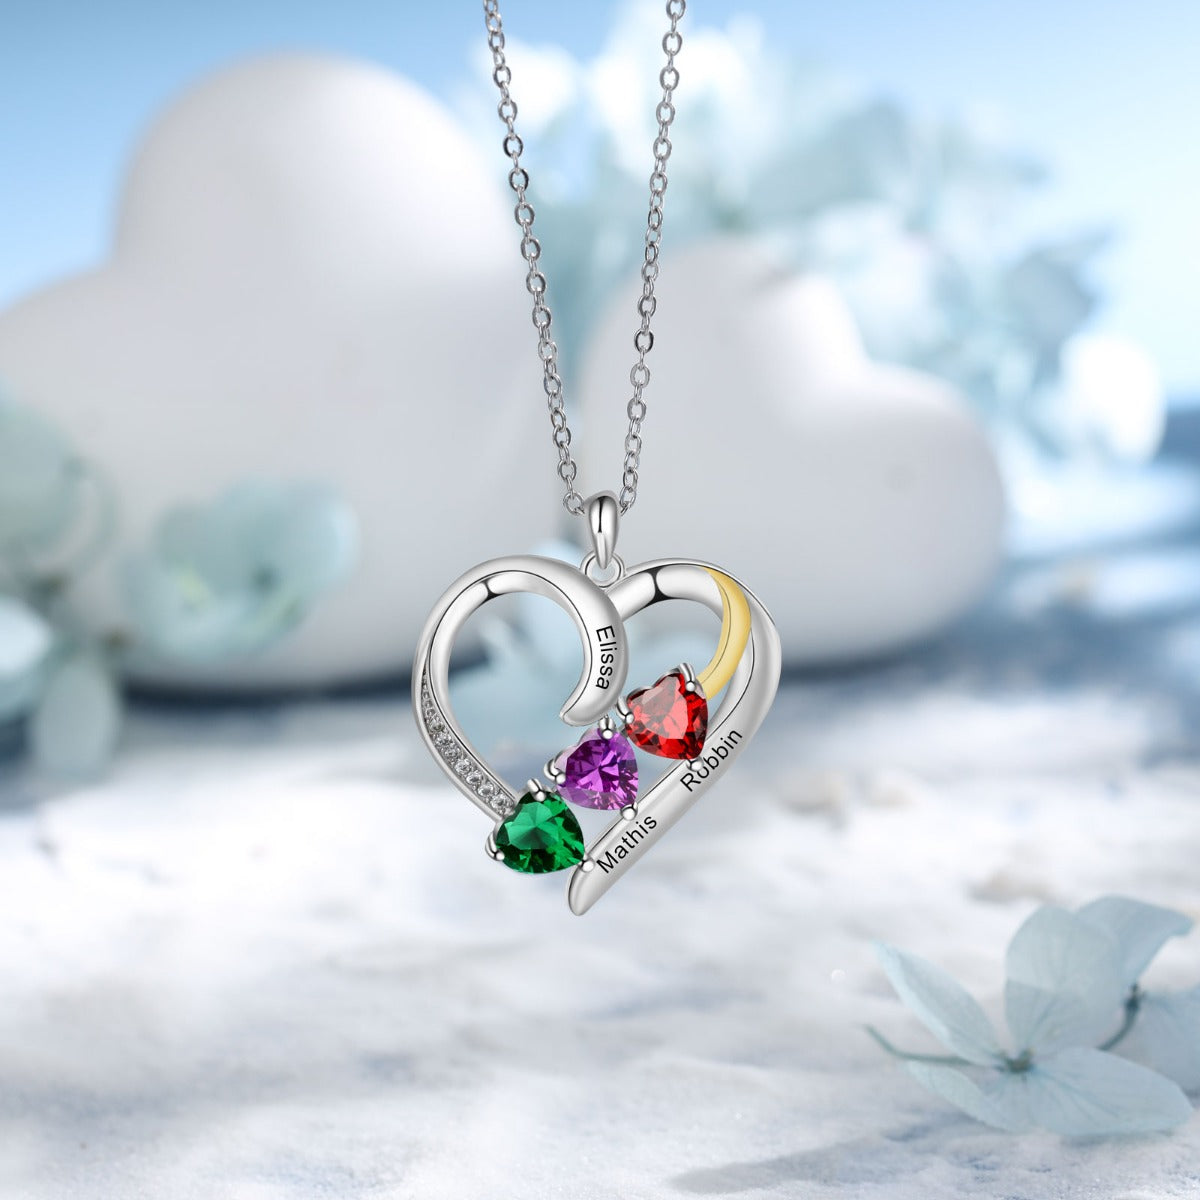 Personalized Rhodium Plated Heart Shape Pendant Necklace with 3 Birthstones 3 Engraved Names